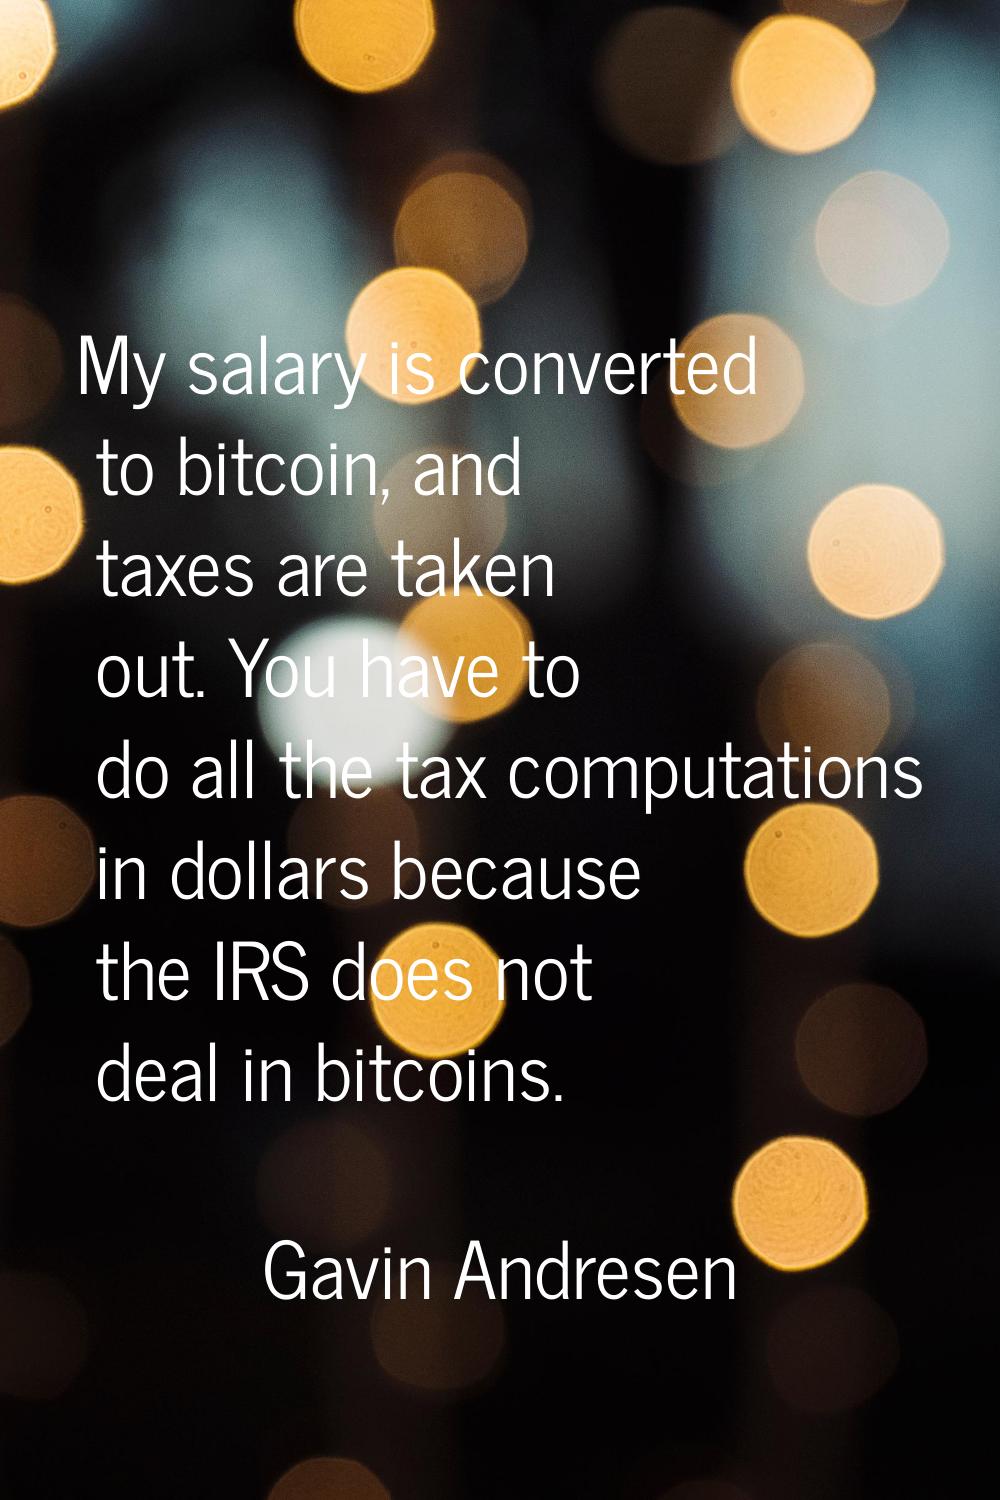 My salary is converted to bitcoin, and taxes are taken out. You have to do all the tax computations